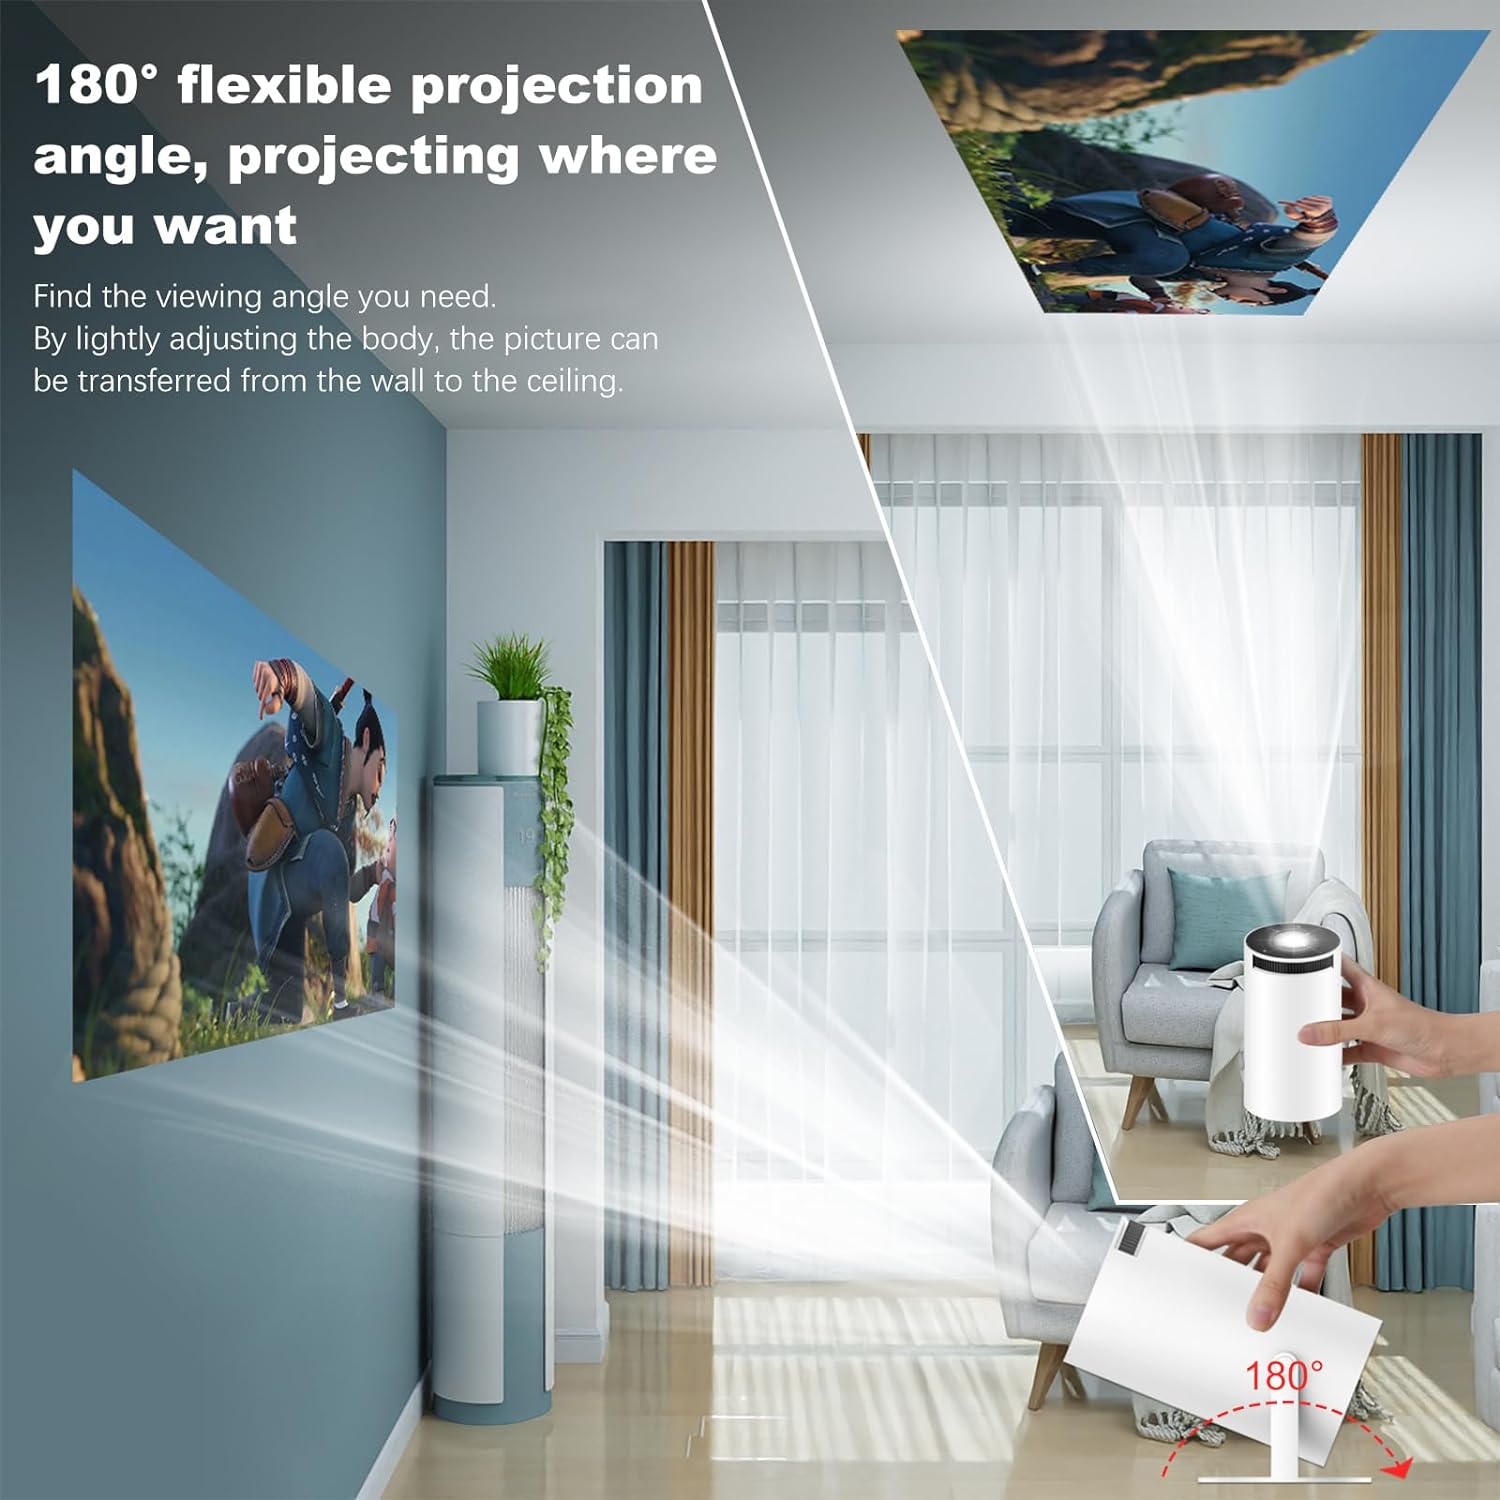 Mini Projector, HY300 Auto Keystone Correction Portable Projector, 4K/ 200 ANSI Smart Projector with 2.4/5G WiFi, BT 5.0, 130 Inch Screen, 180 Degree Flip, Round Design, Home Video Projector - MAGCUBIC